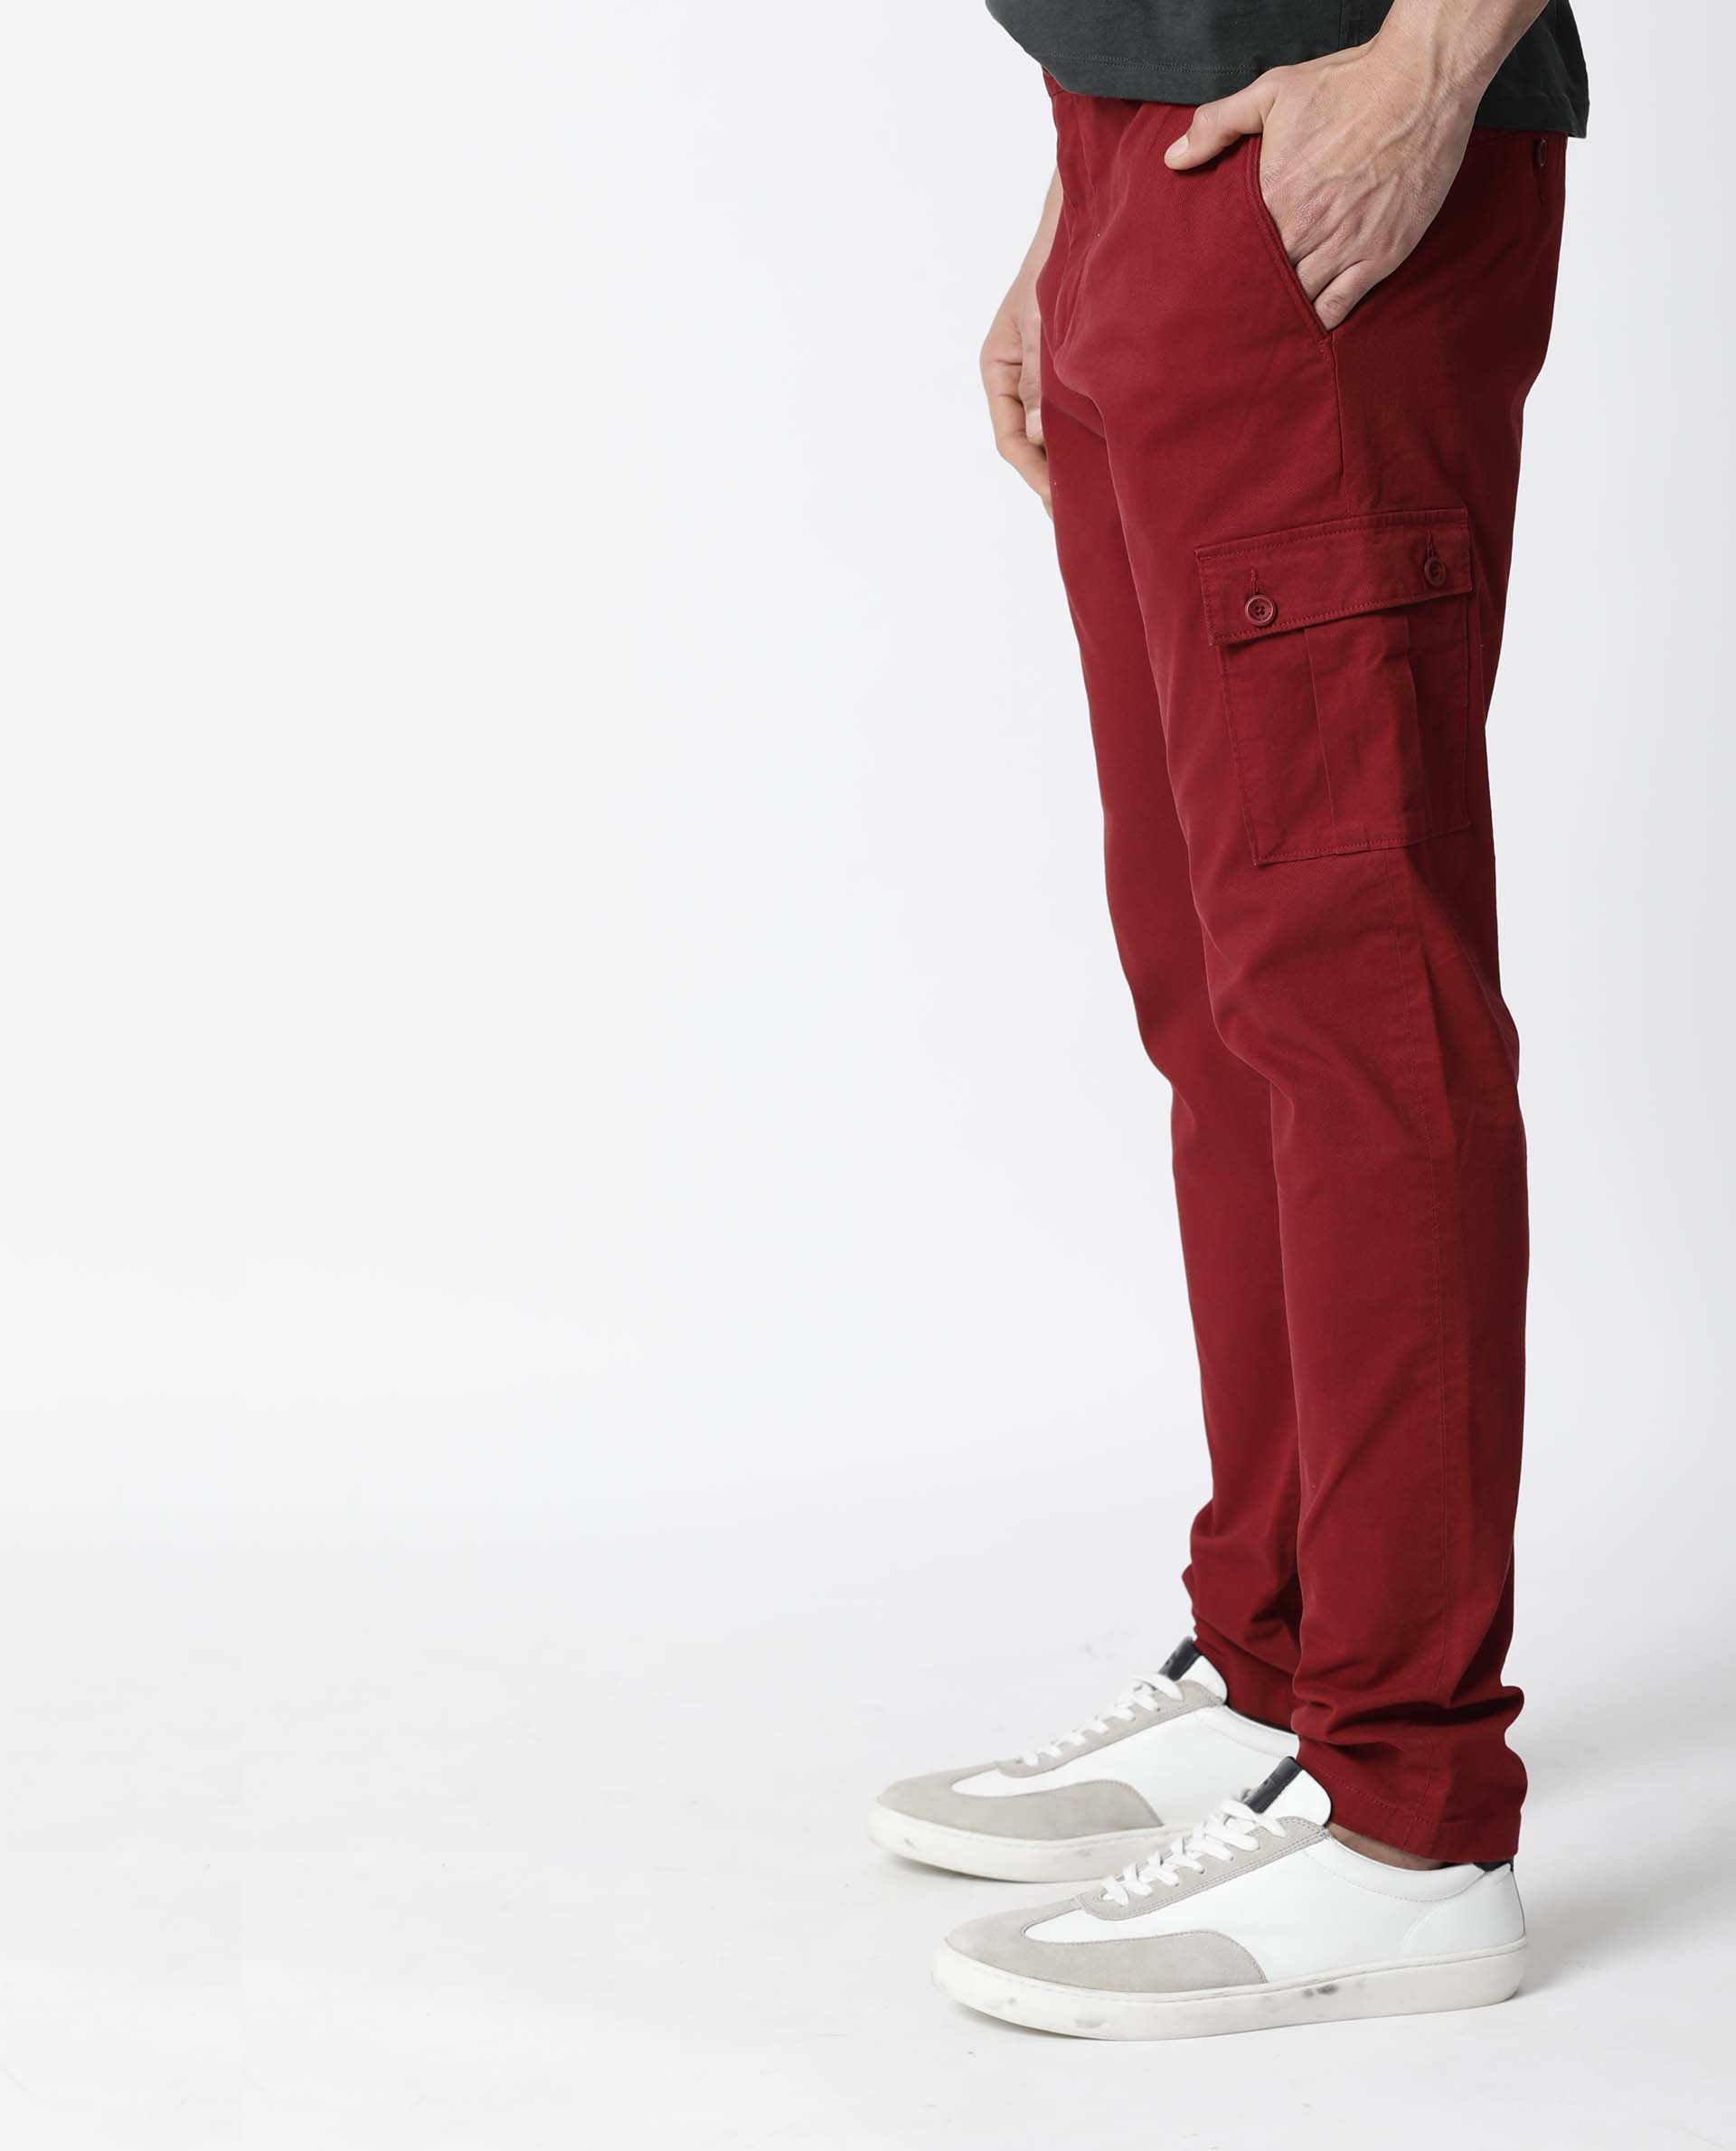 Cargo Trousers For Men 6 Pocket in Cotton Camel Color